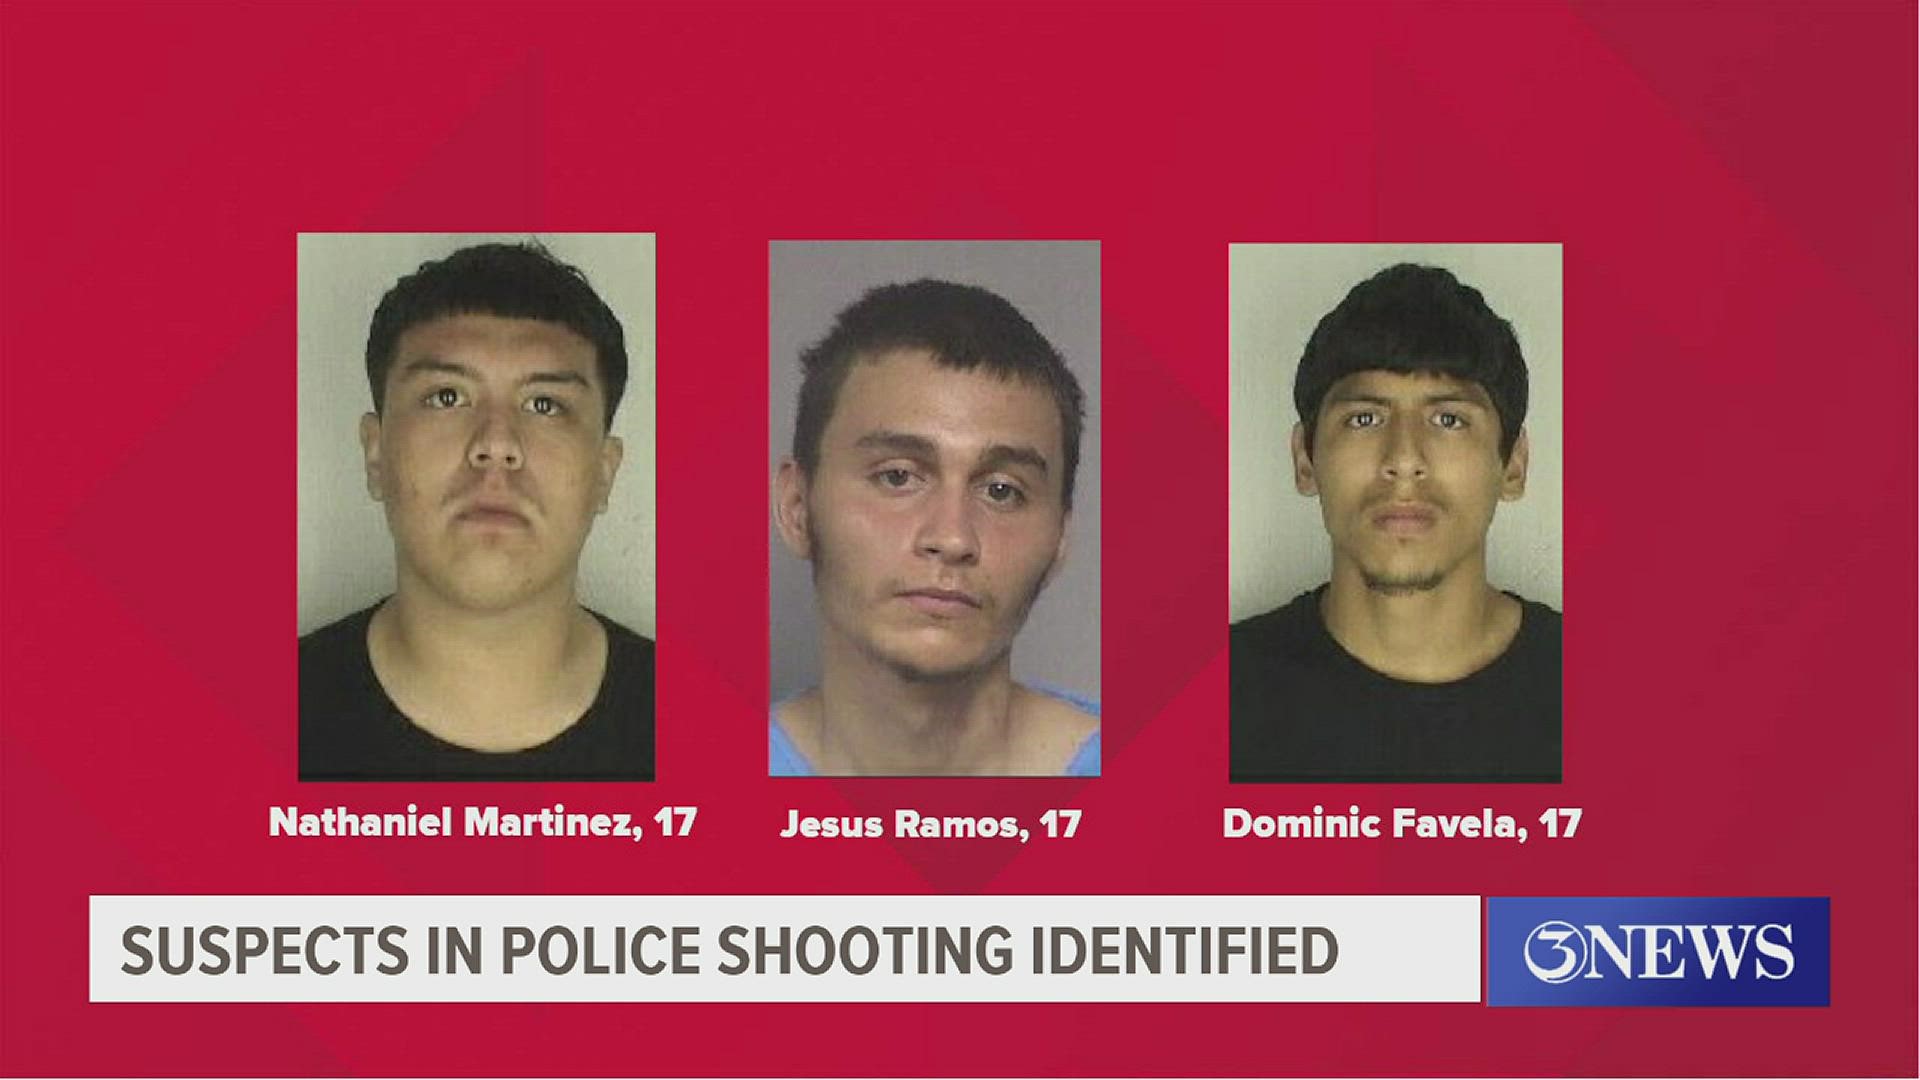 17-year-old Jesus Ramos, Nathaniel Martinez, and Dominic Favela will face multiple charges.